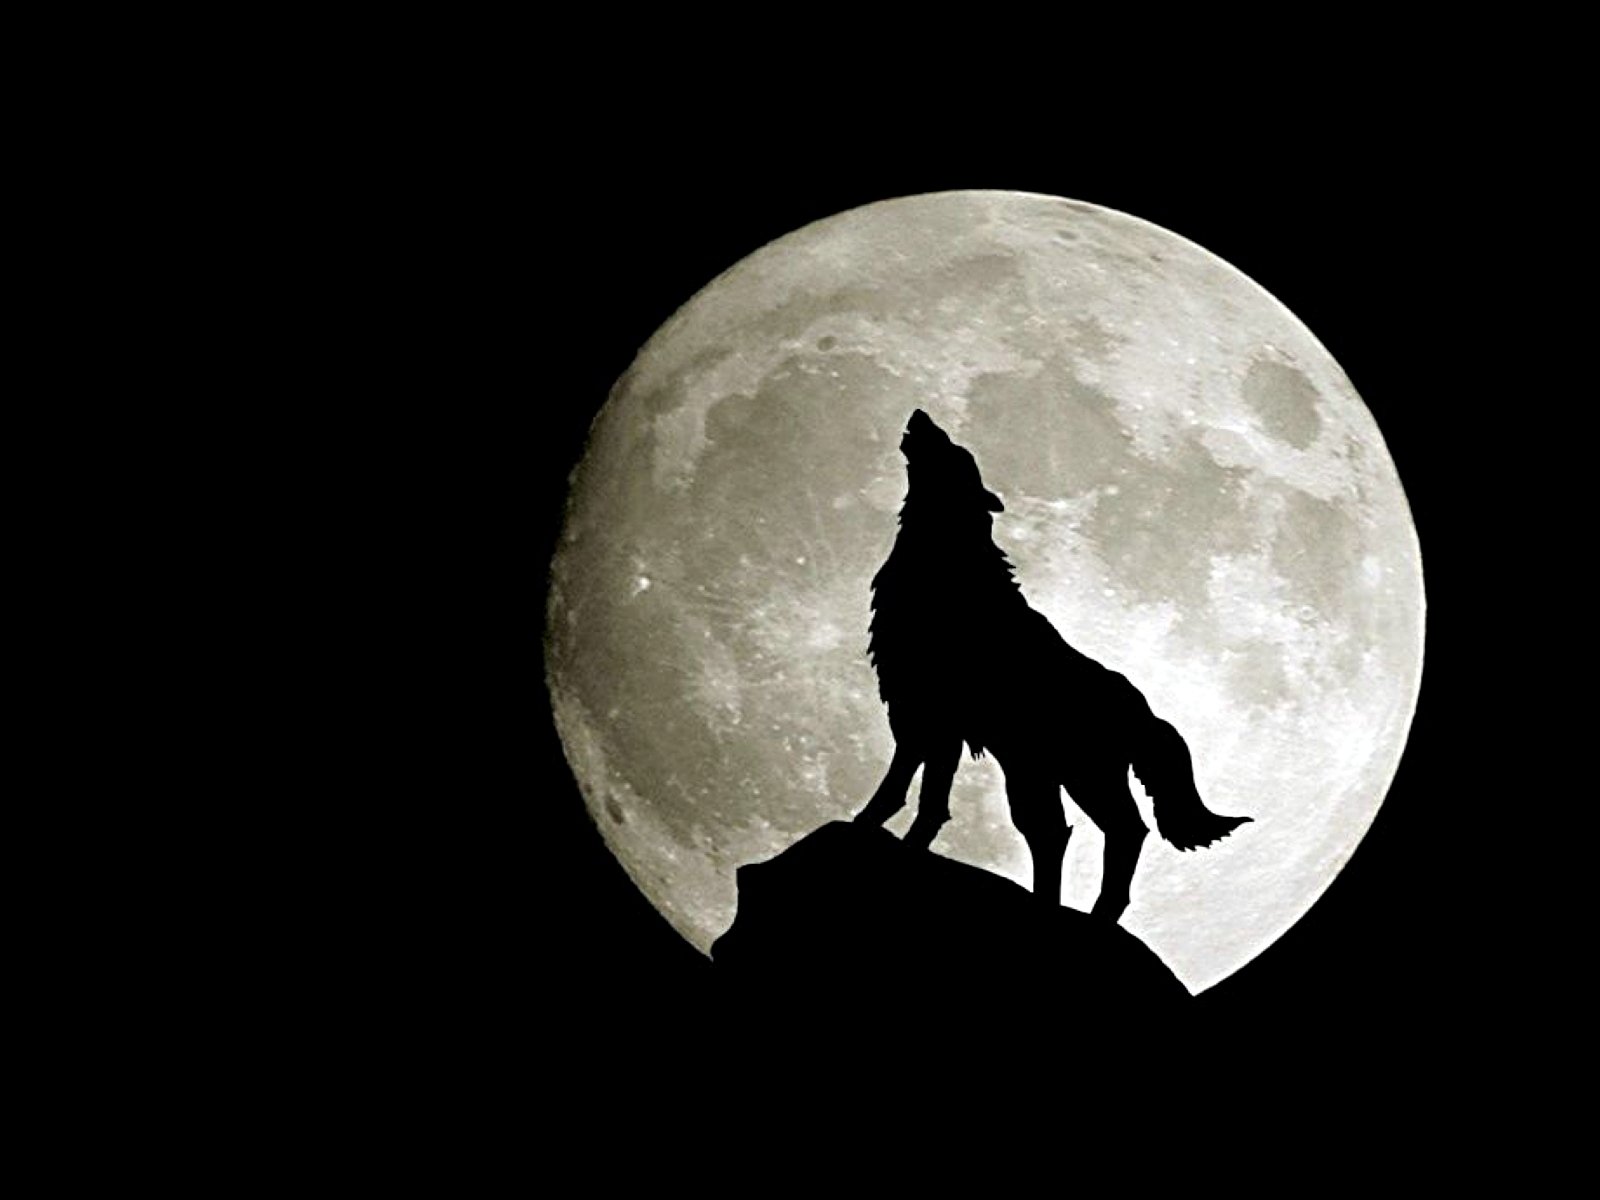 Wolf HD Wallpaper Background Image